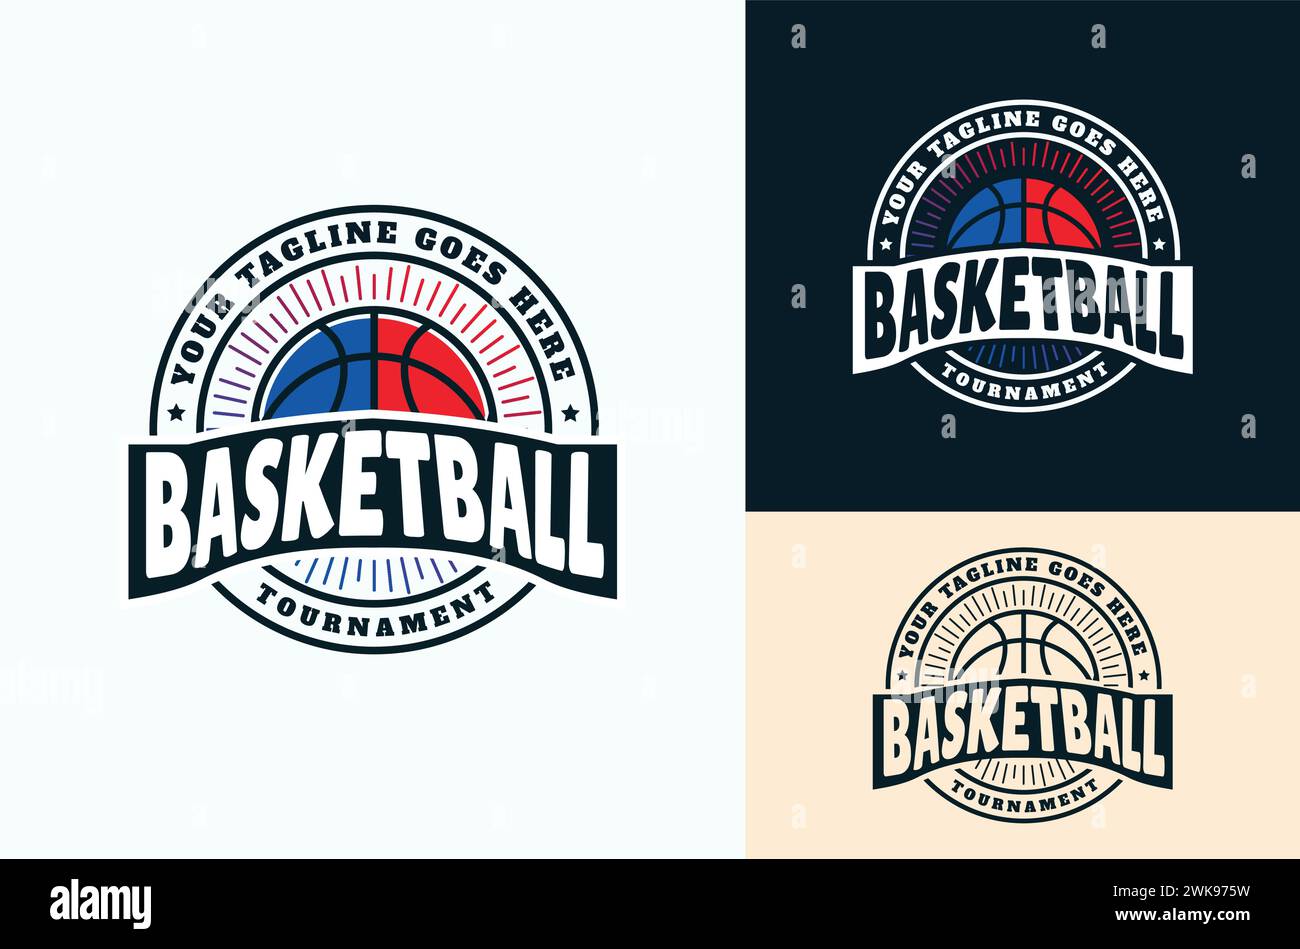 American Sport Basketball Vintage Retro Club Emblem. Basketball with red and blue reflections, tournament, design template Stock Vector